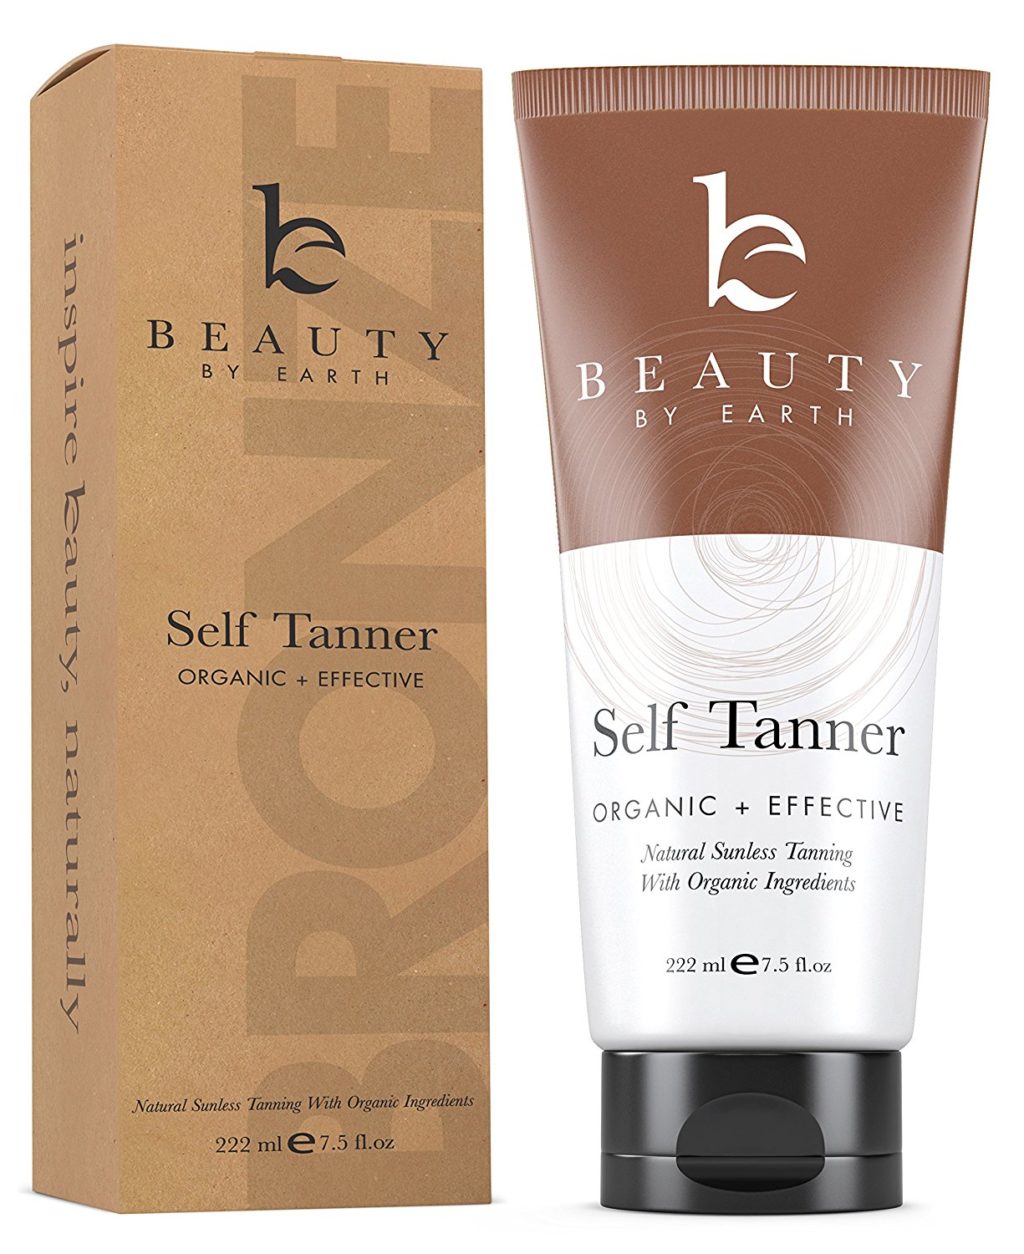 Beauty by Earth Organic Sunless Tanning Lotion​